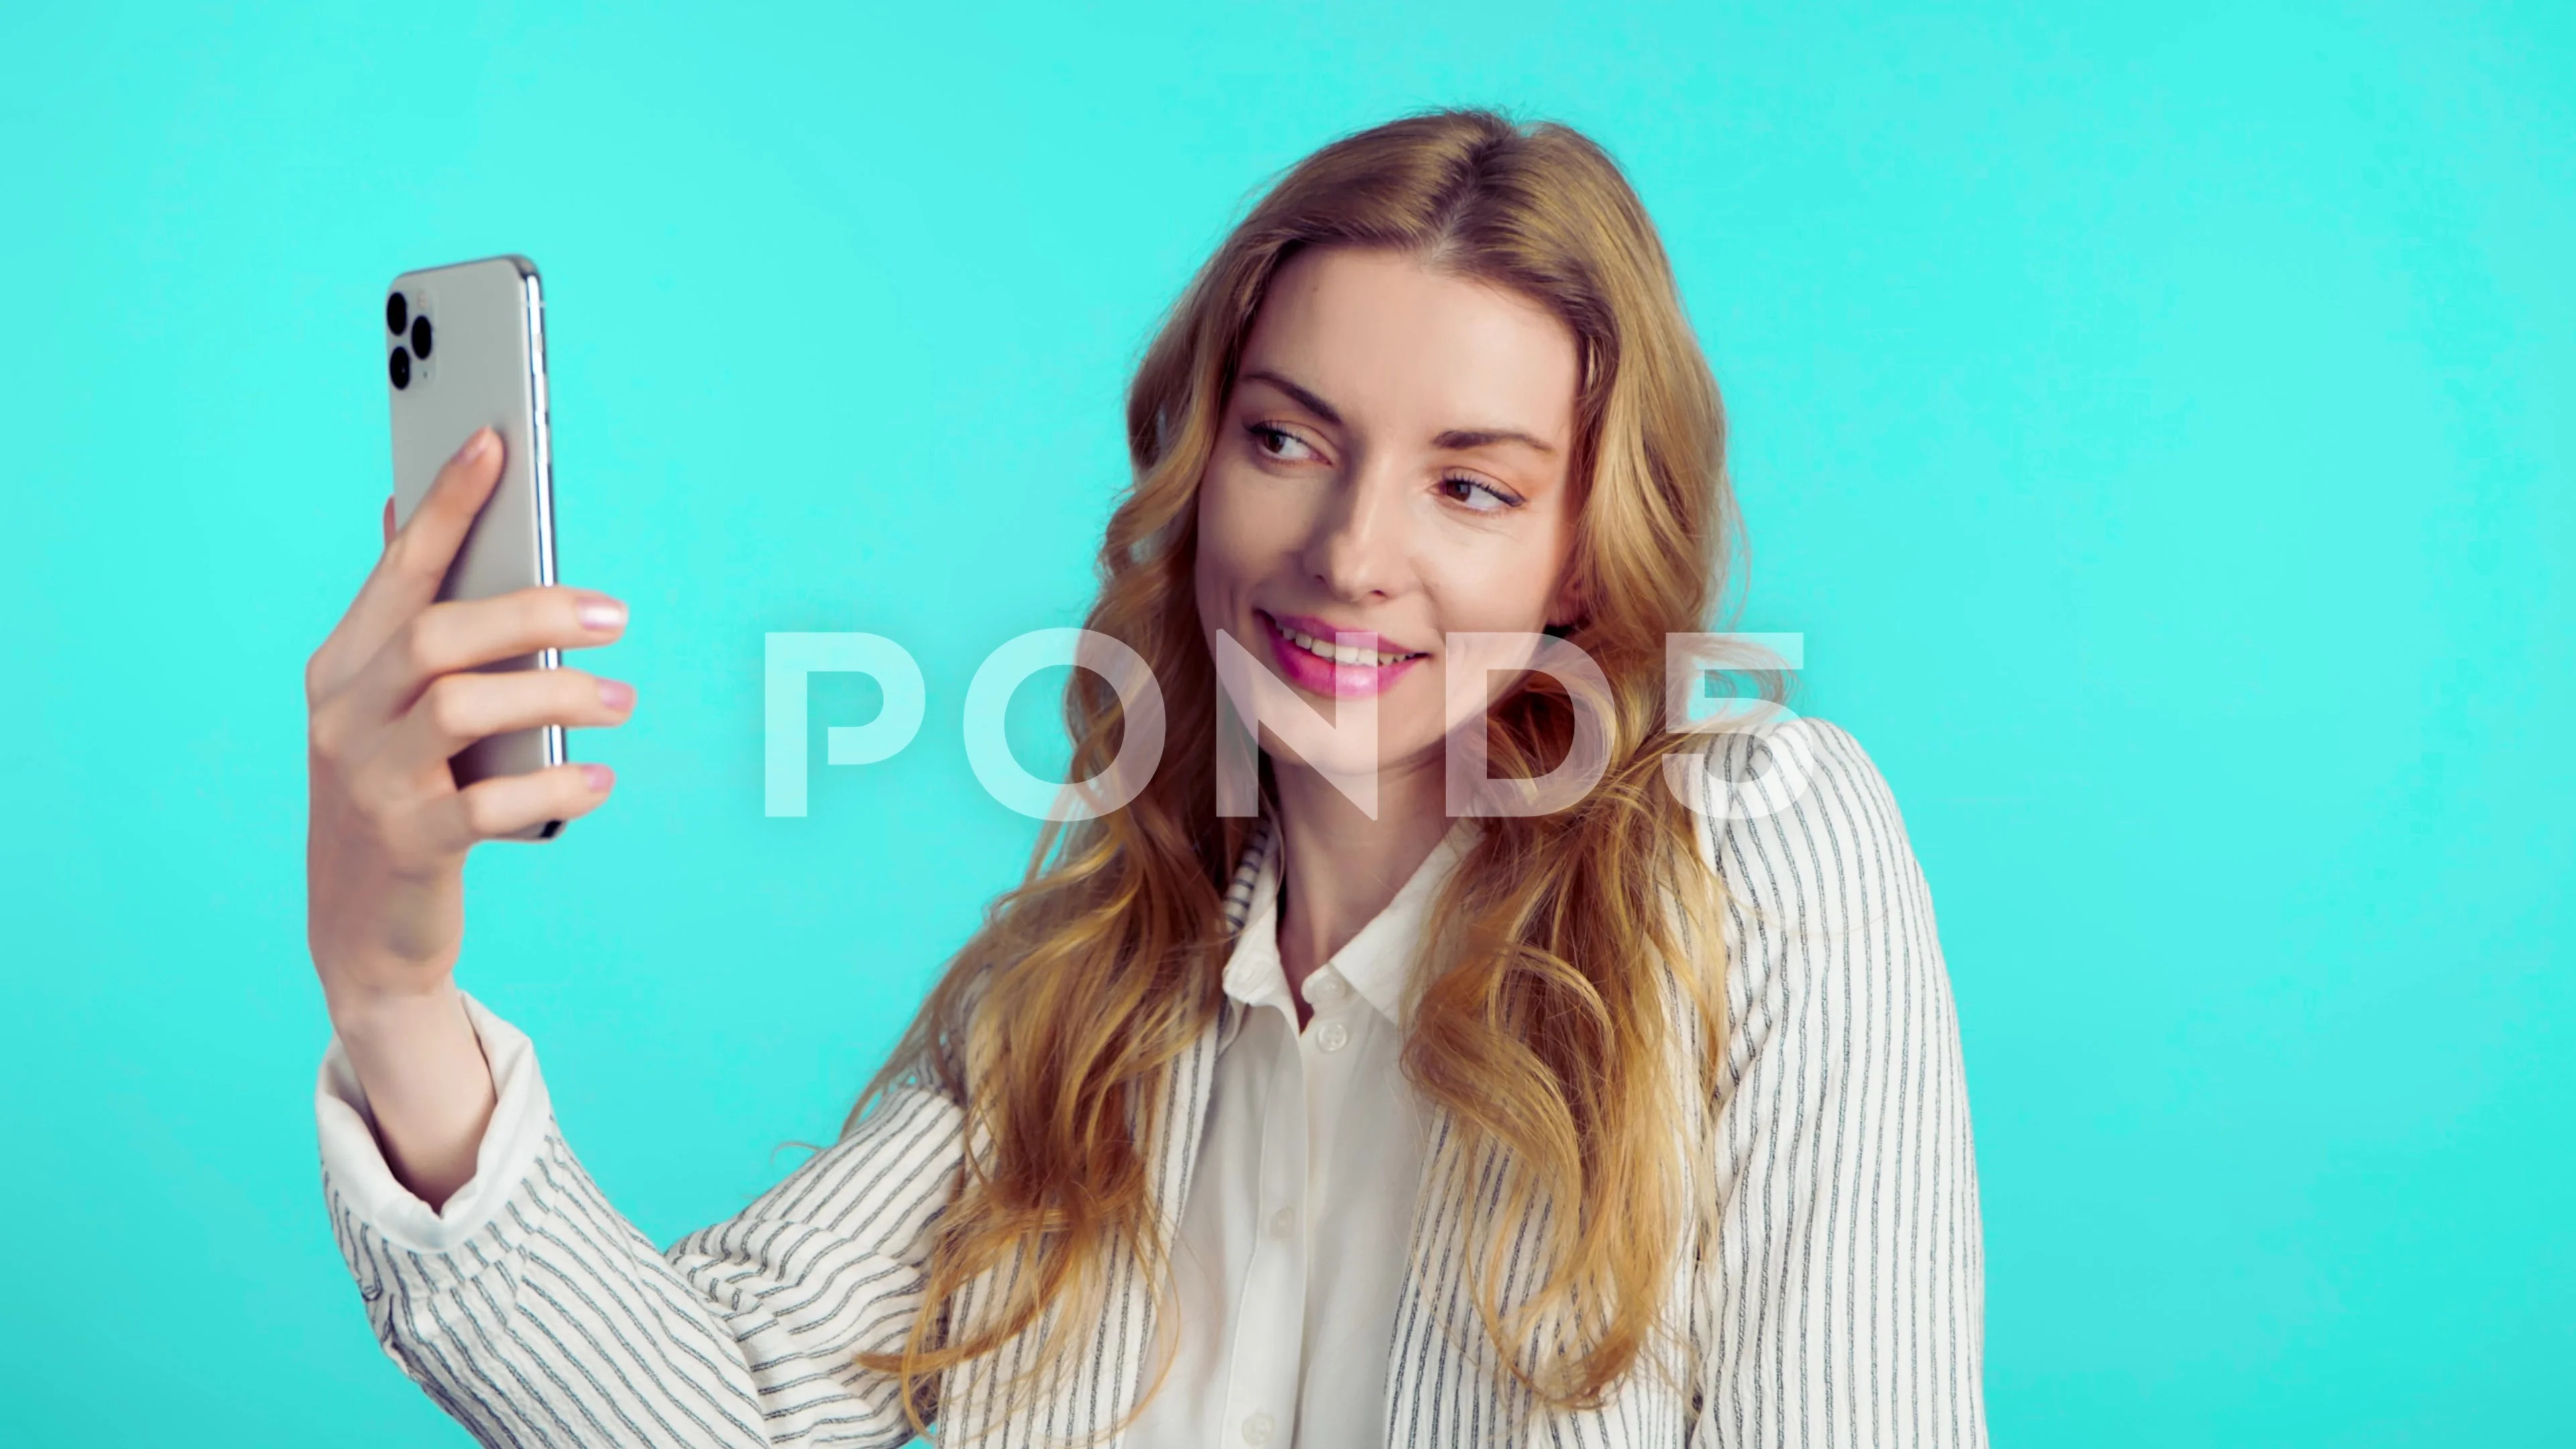 11 Best Selfie Poses + How to Pose for Selfies | Facetune